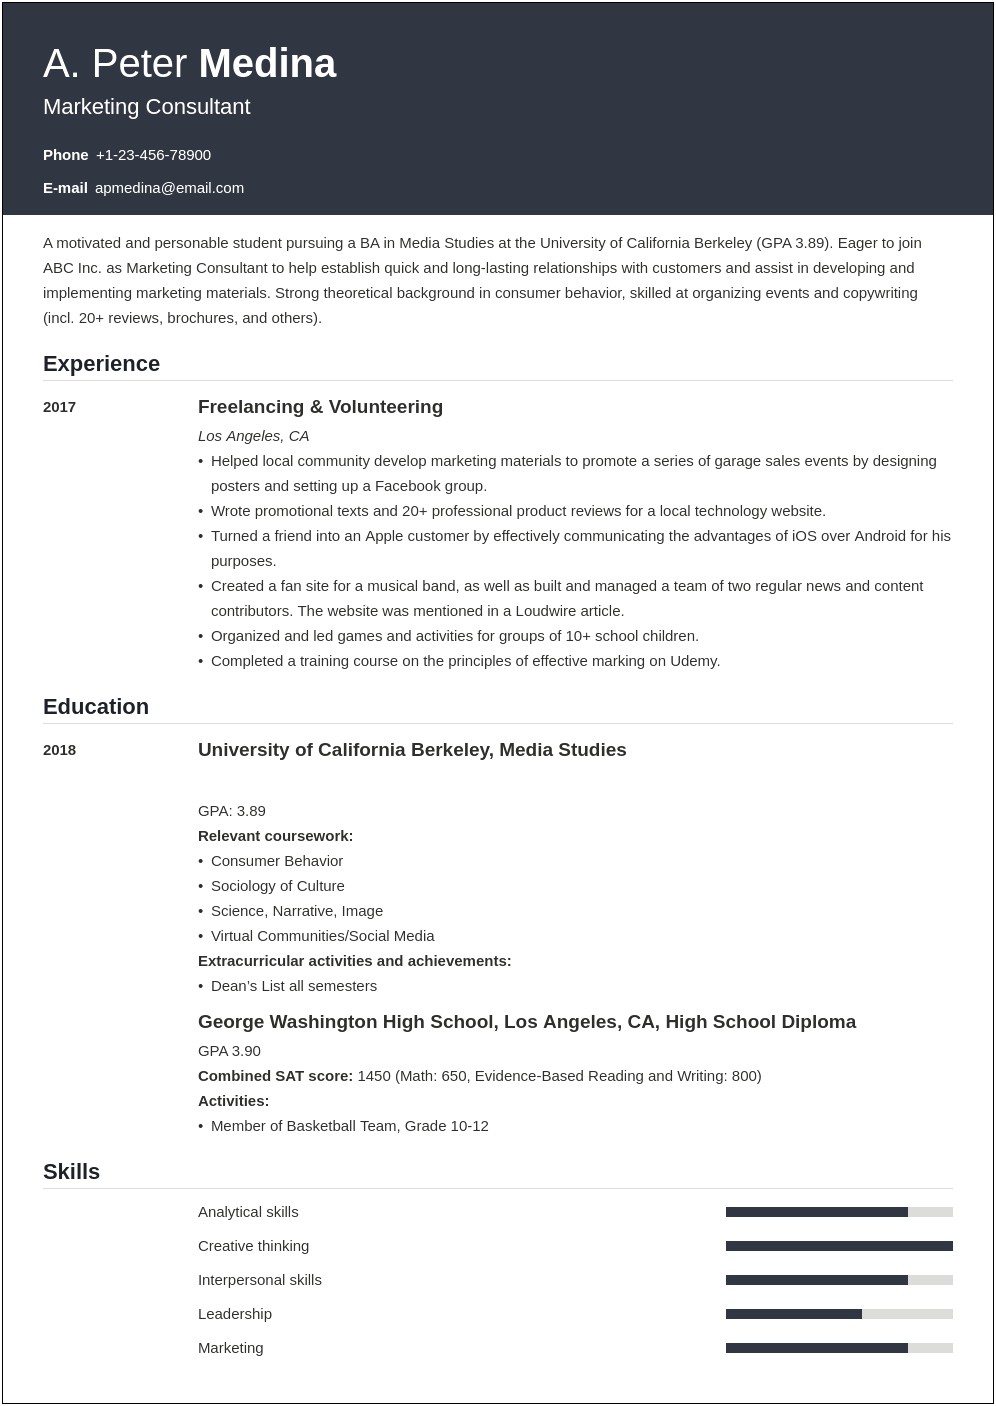 Resume Samples With Little Work Experience